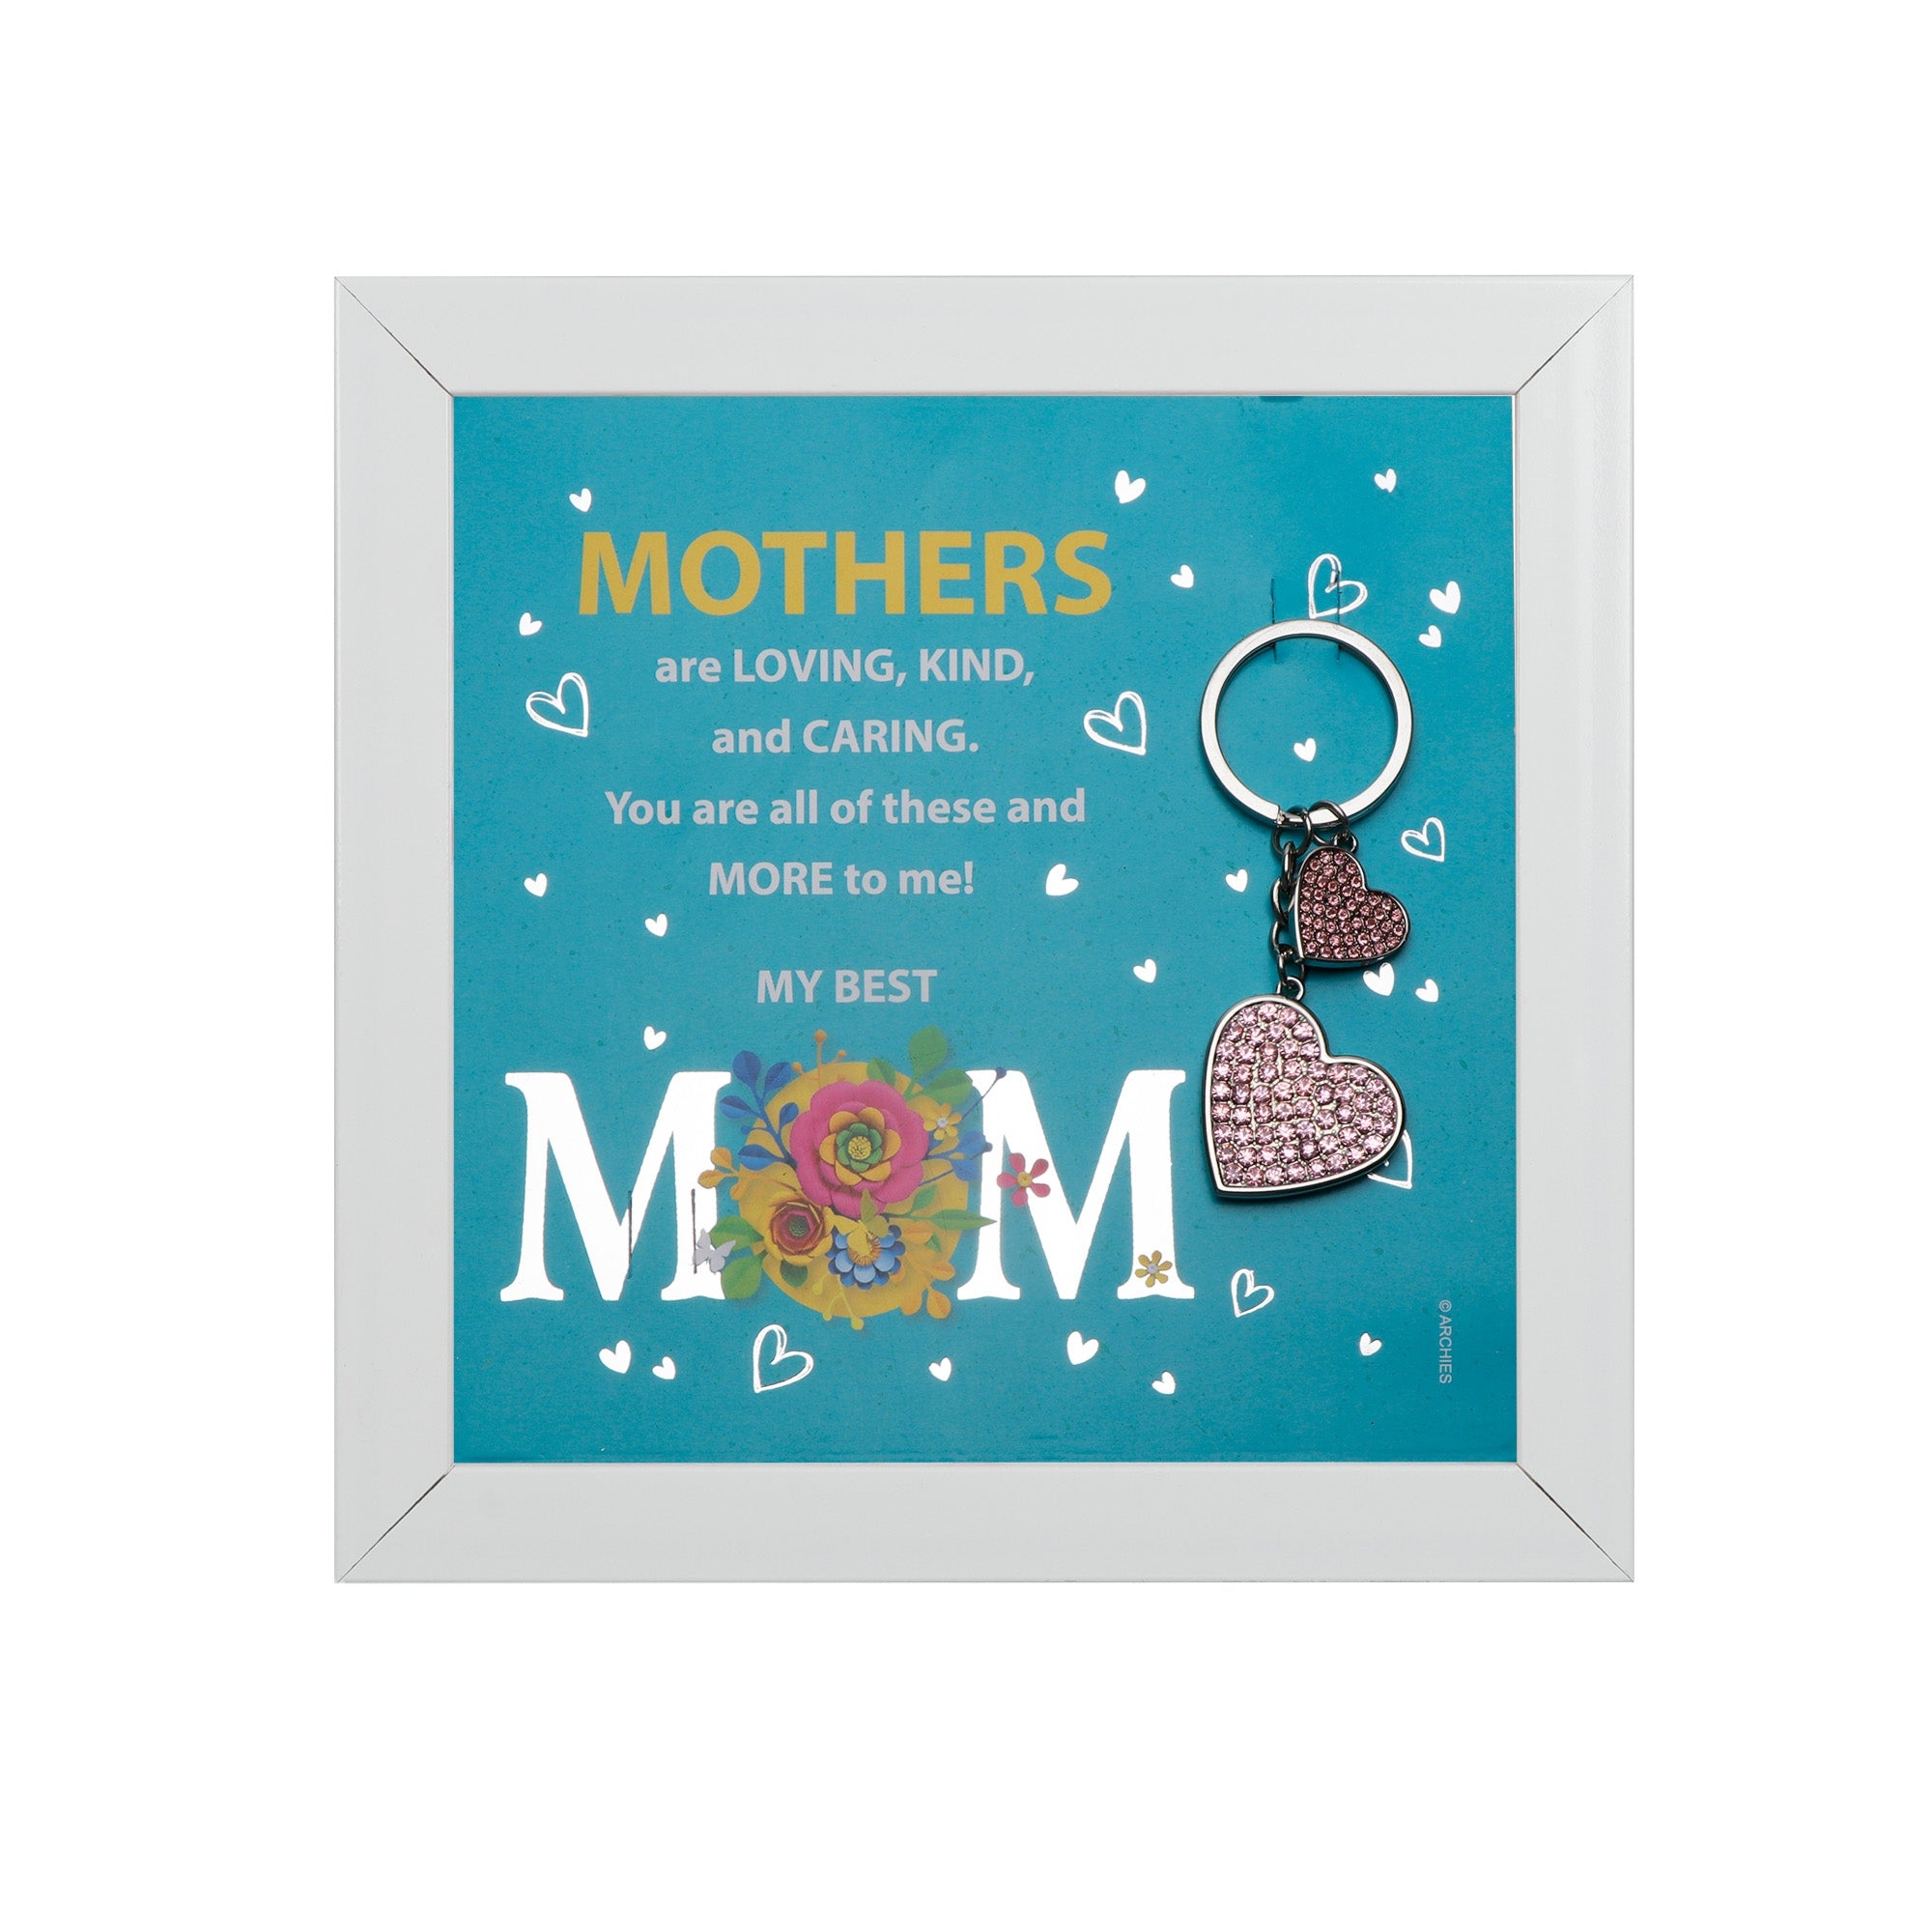 Archies | Archies KEEPSAKE QUOTATION-MOTHER ARE LOVING, KIND, AND CARING For gifting and Home décor